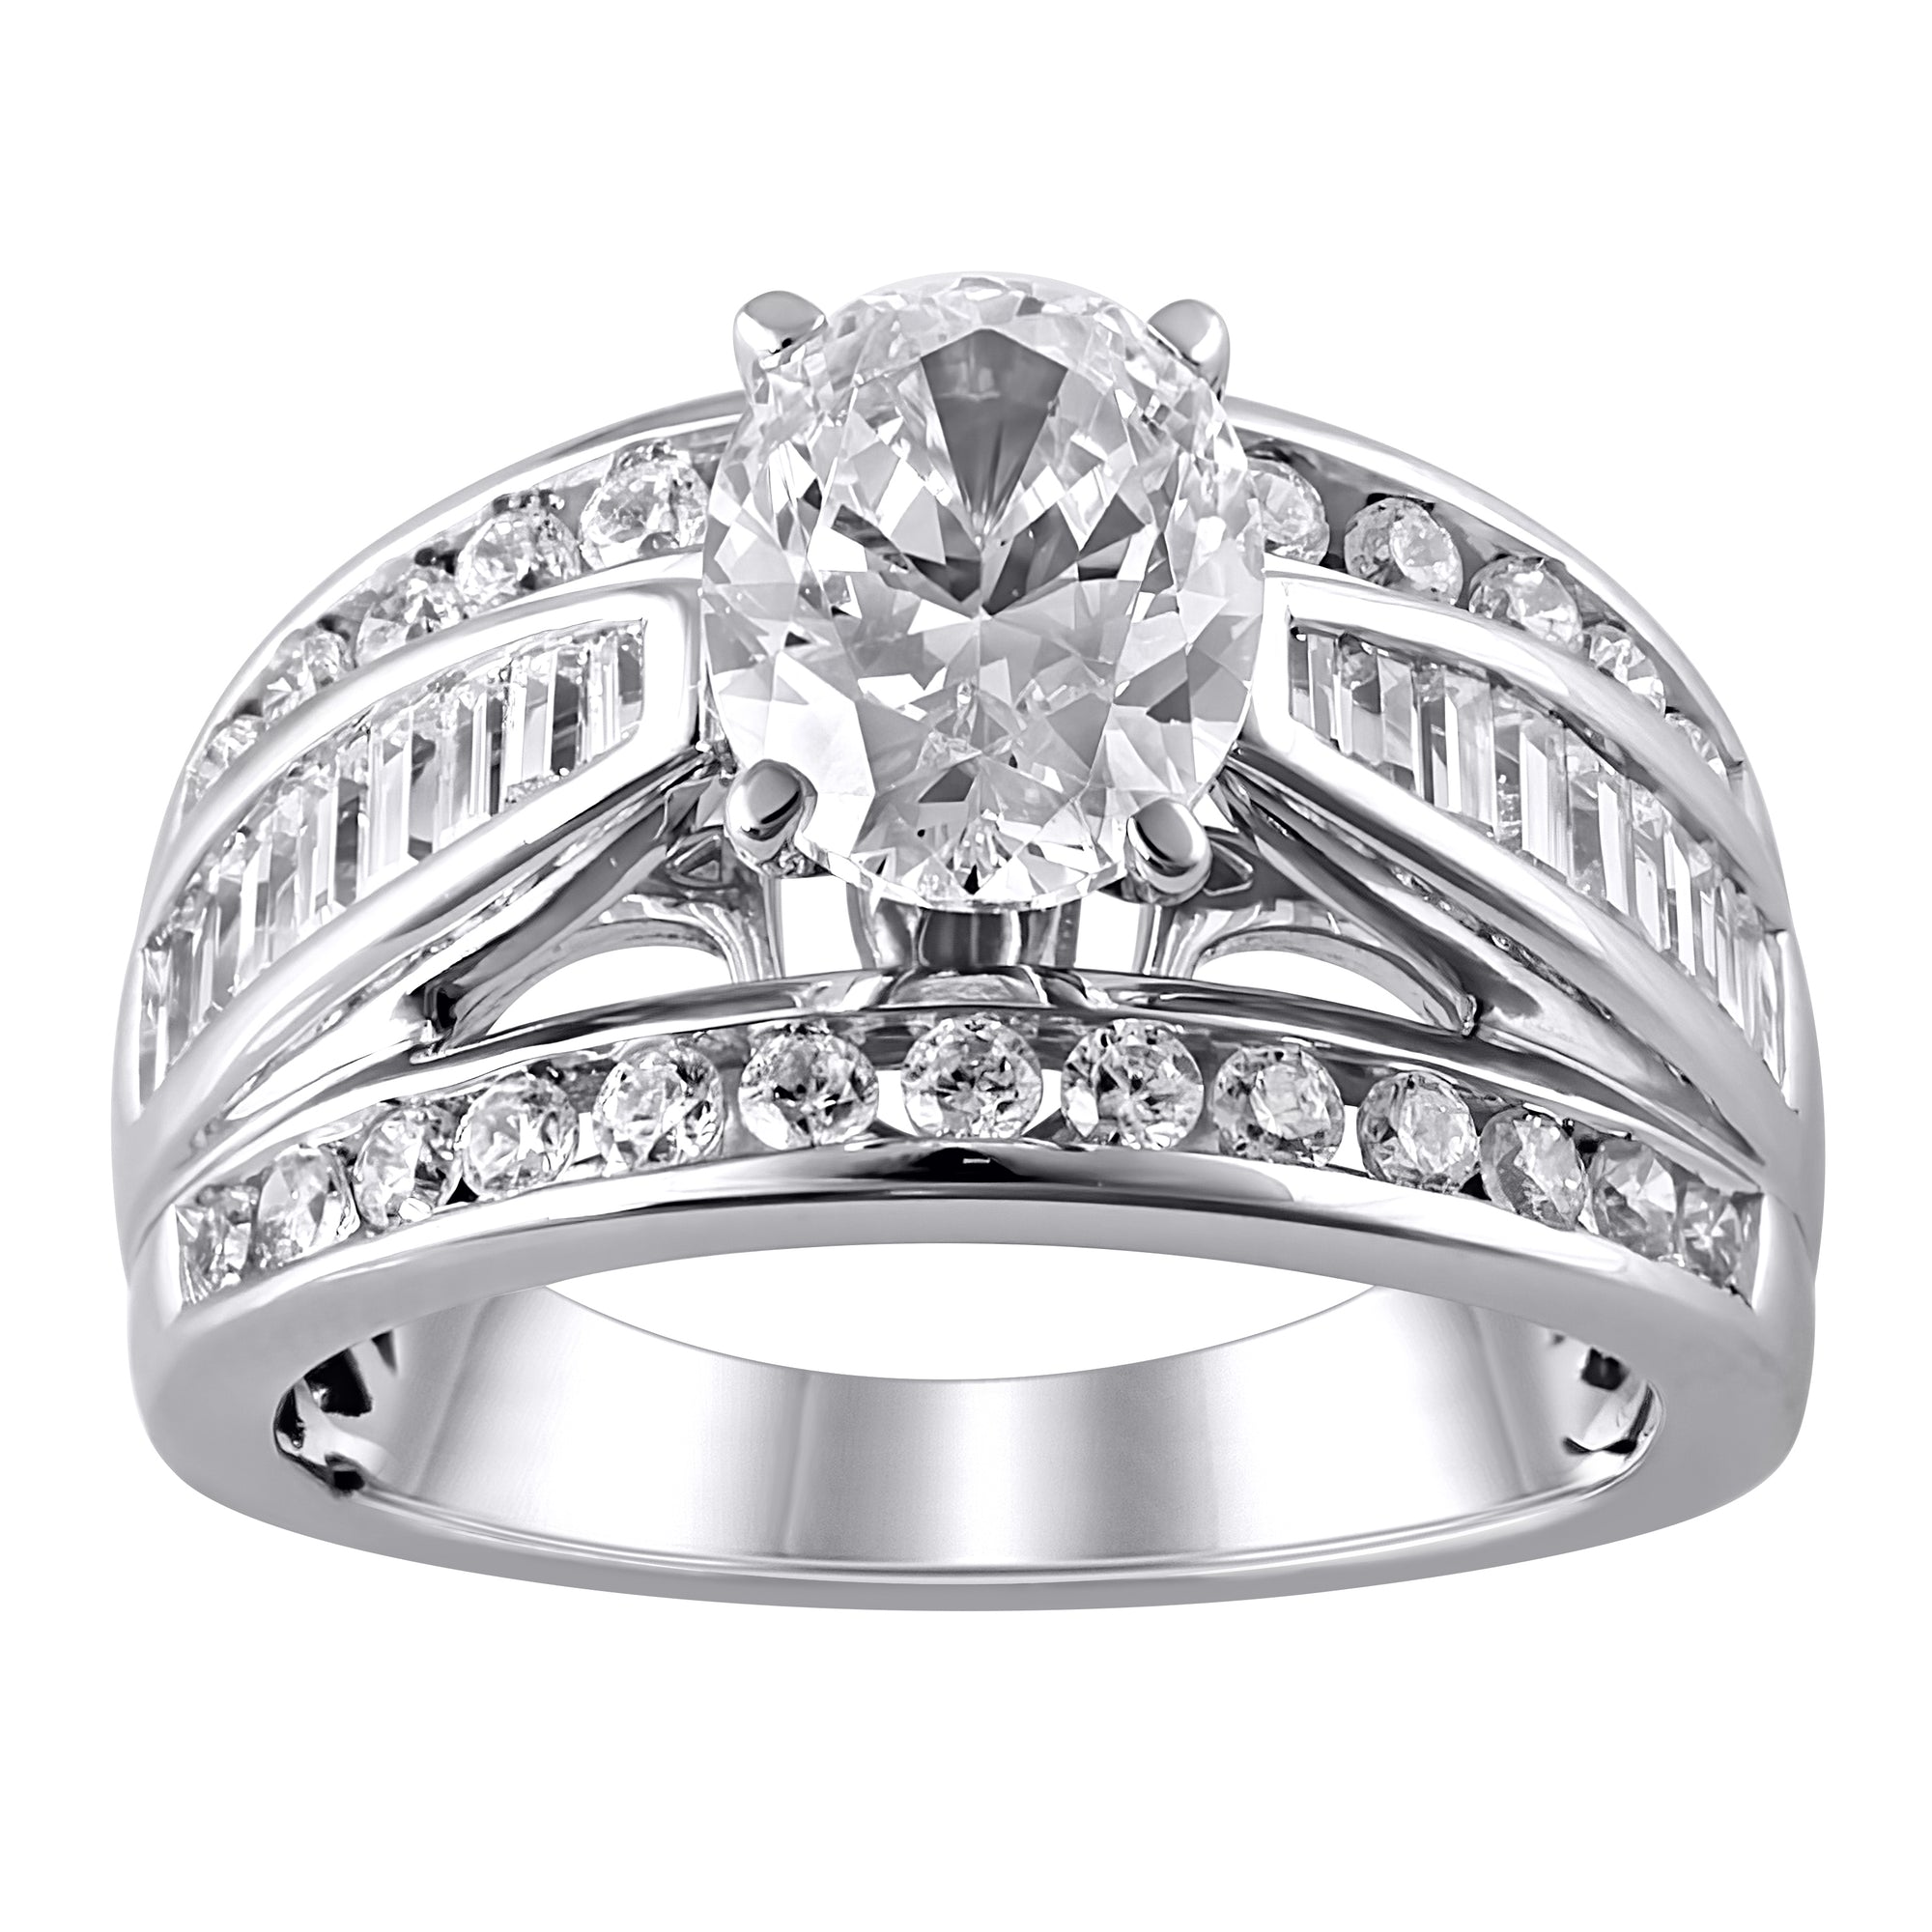 Round and Baguette Diamond Semi Mount Ring made in 14k White gold